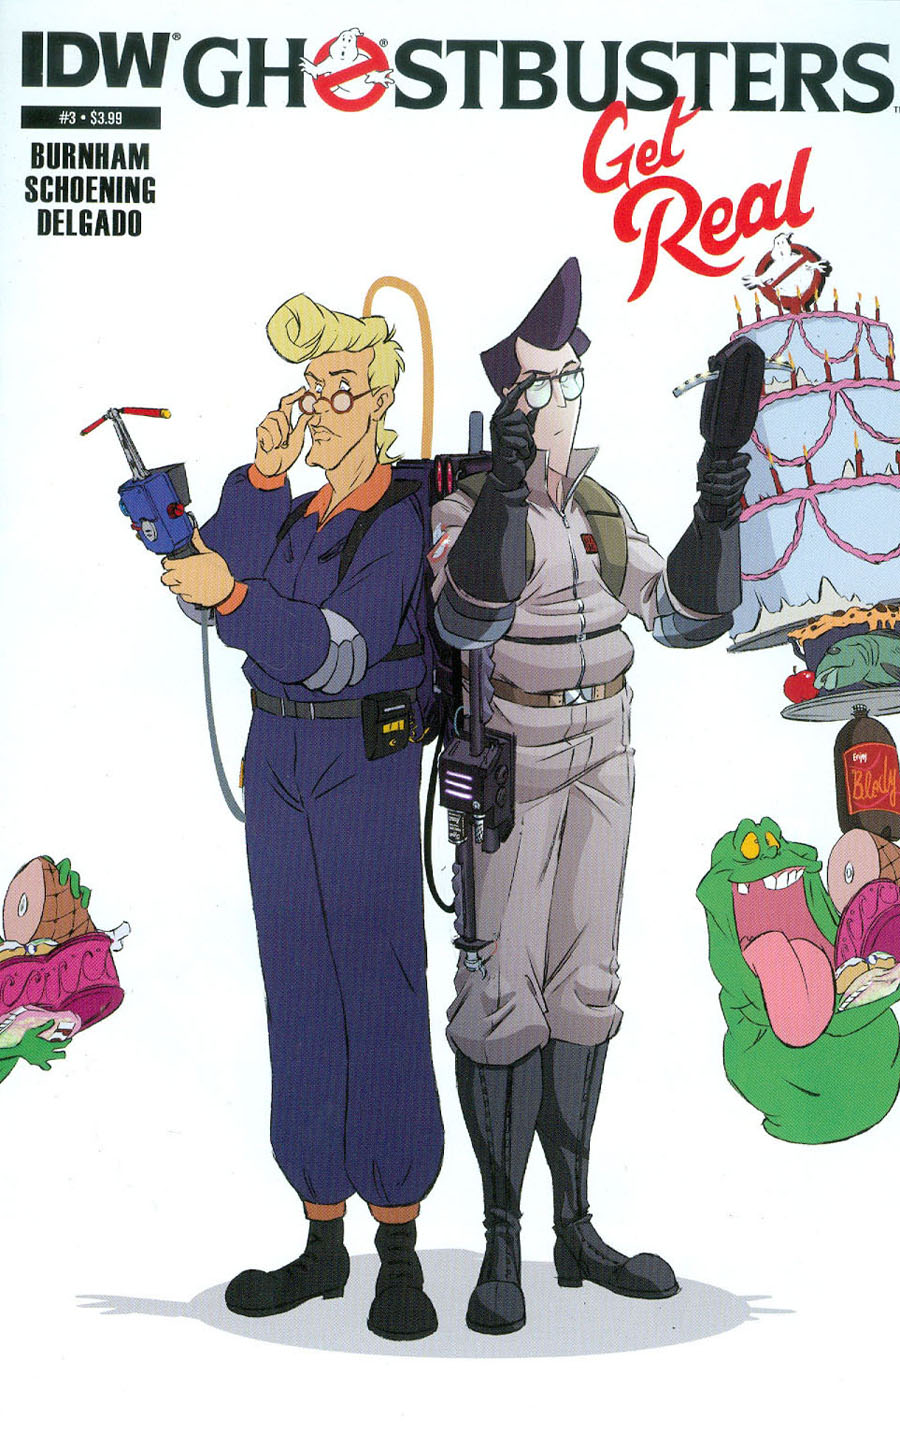 Ghostbusters Get Real #3 Cover A Regular Dan Schoening Cover